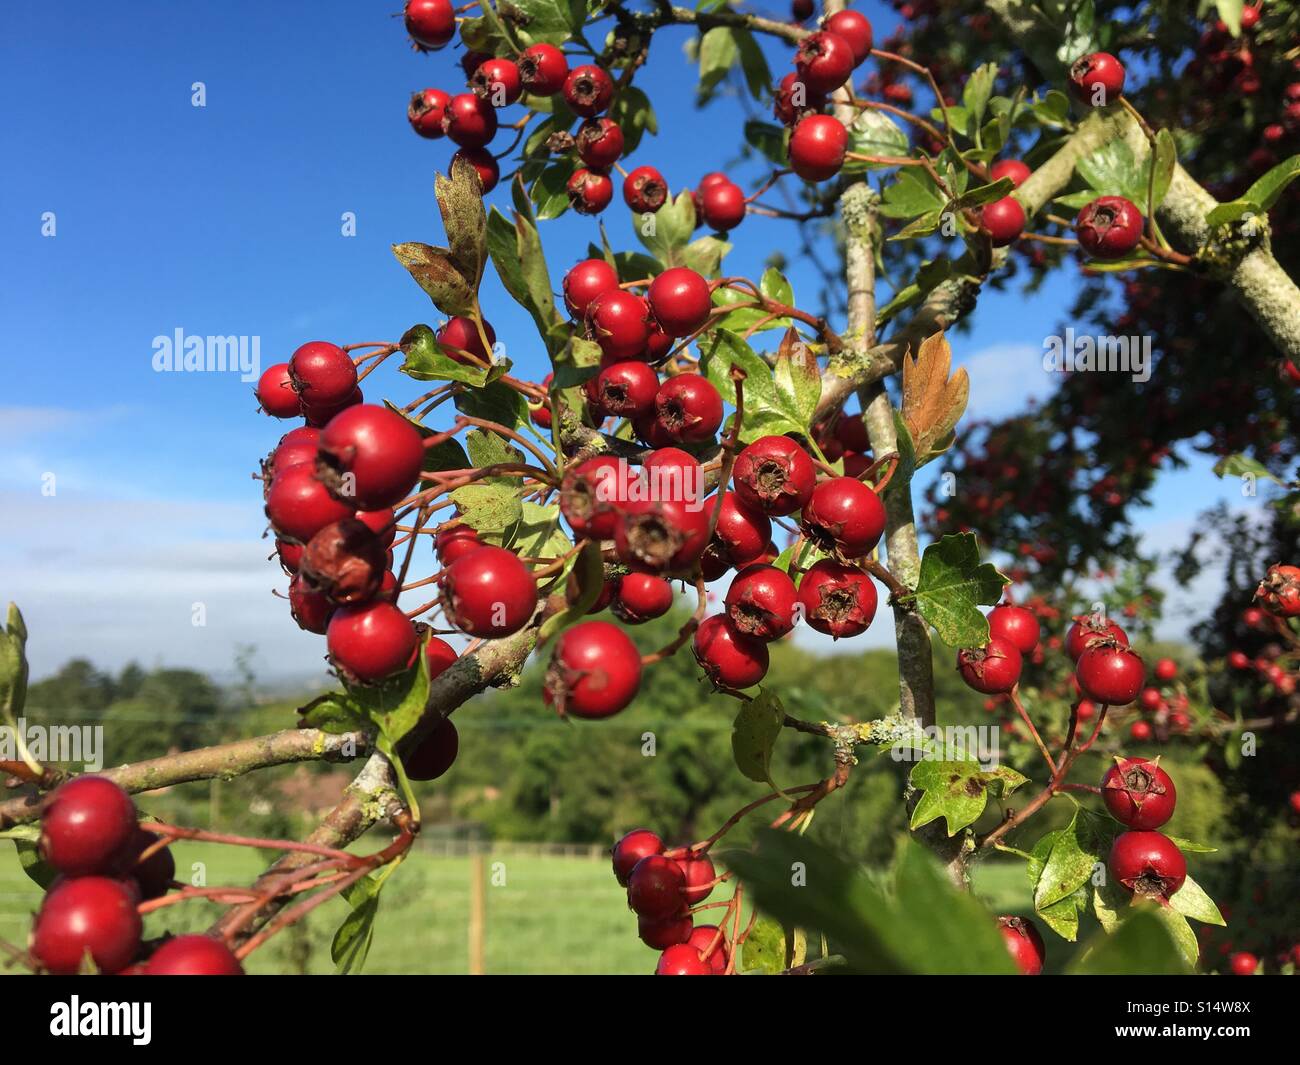 Patterns in Nature - Ripe red hawthorn berries, food for birds in autumn set against green leaves and blue sky Stock Photo